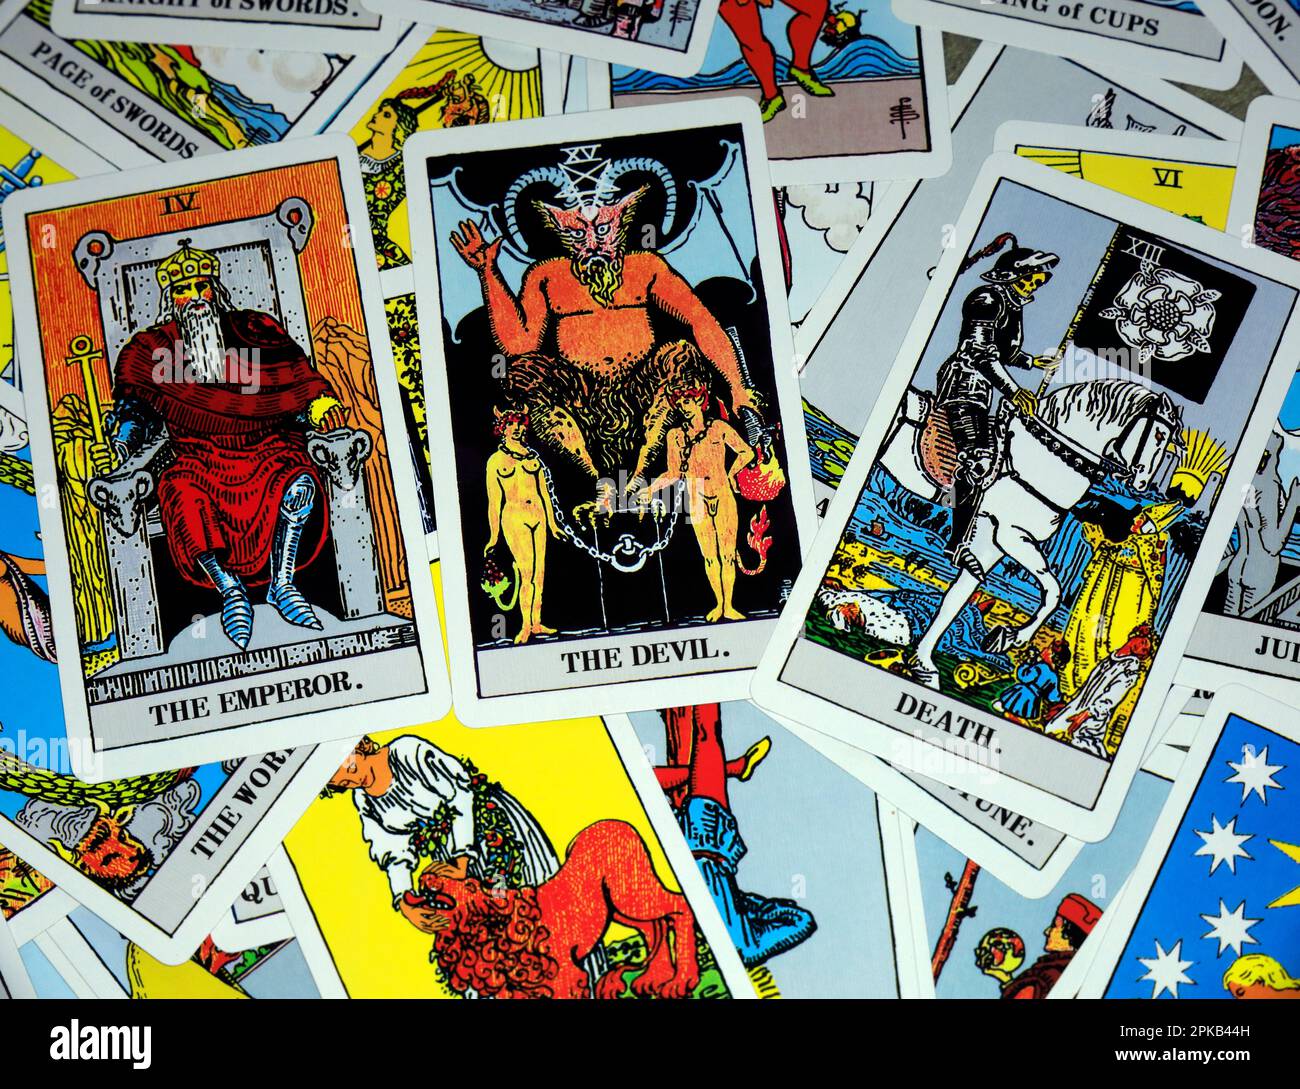 Tarot cardsscattered with Death, Th Emperor and The Devil in prominent position. Stock Photo